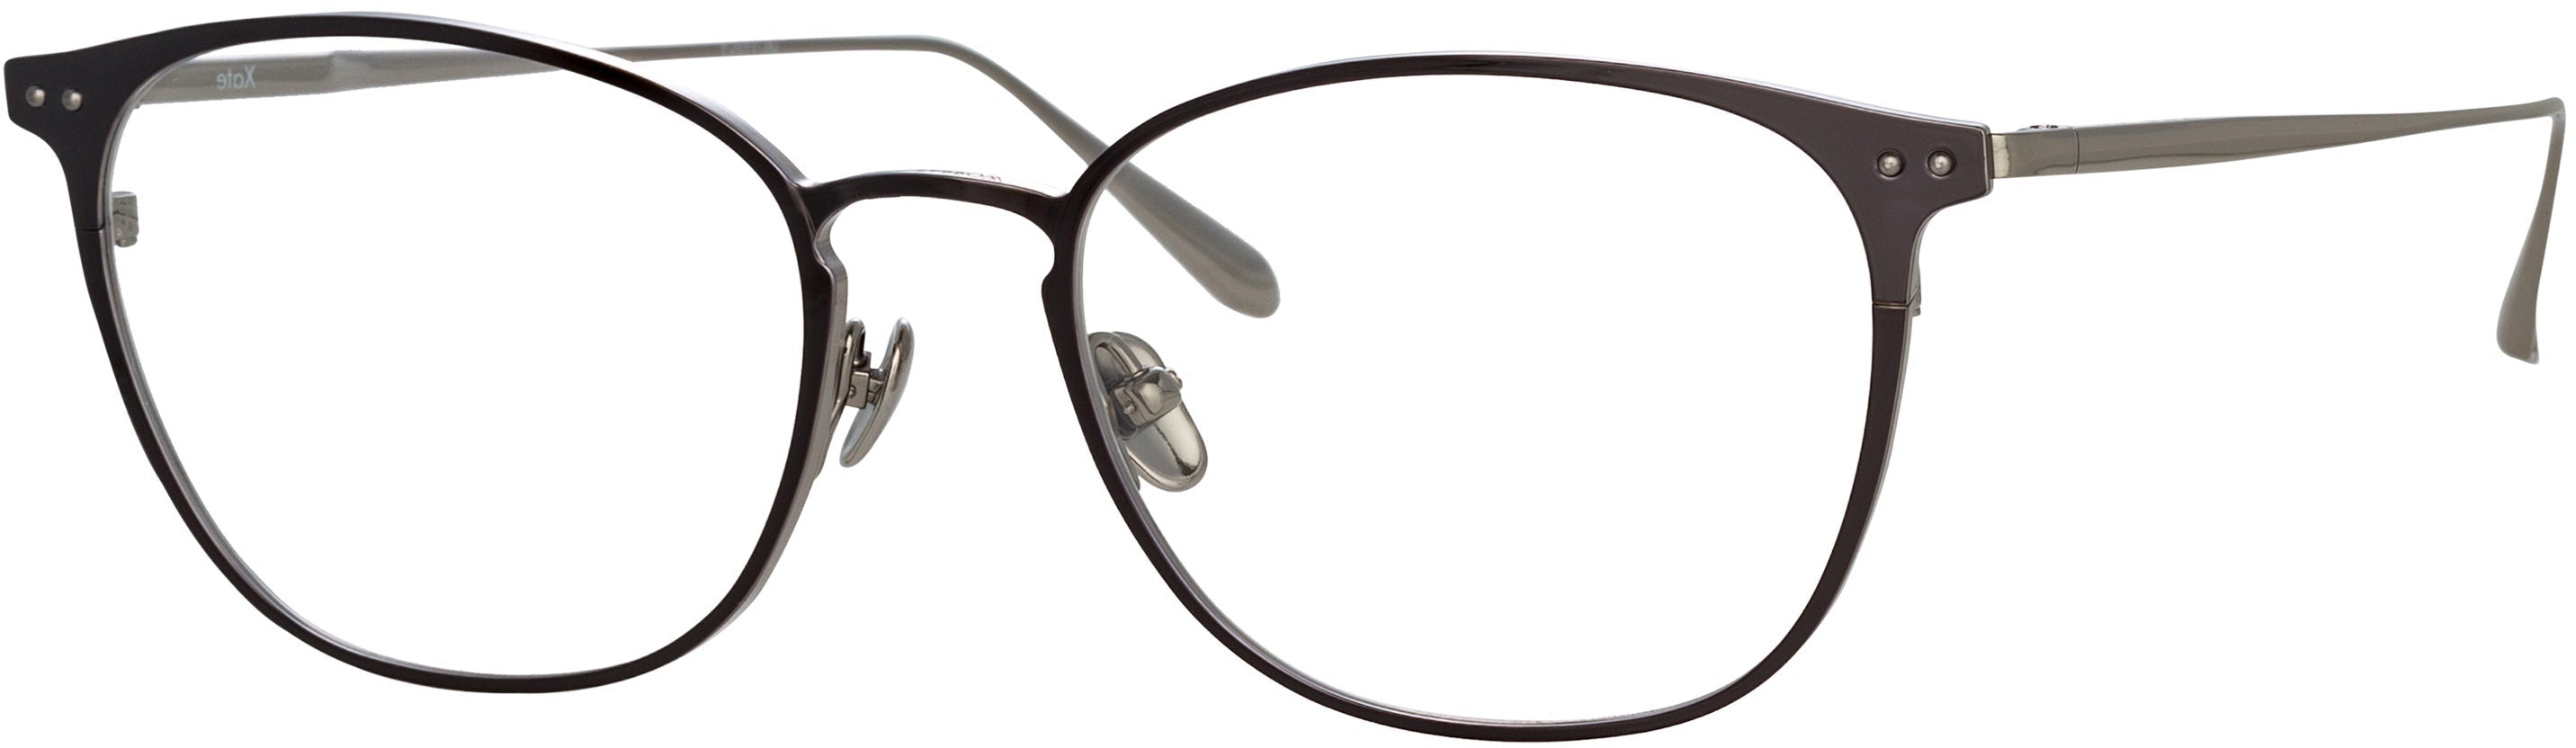 Color_LFL1235C2OPT - Xate Rectangular Optical Frame in Black and White Gold